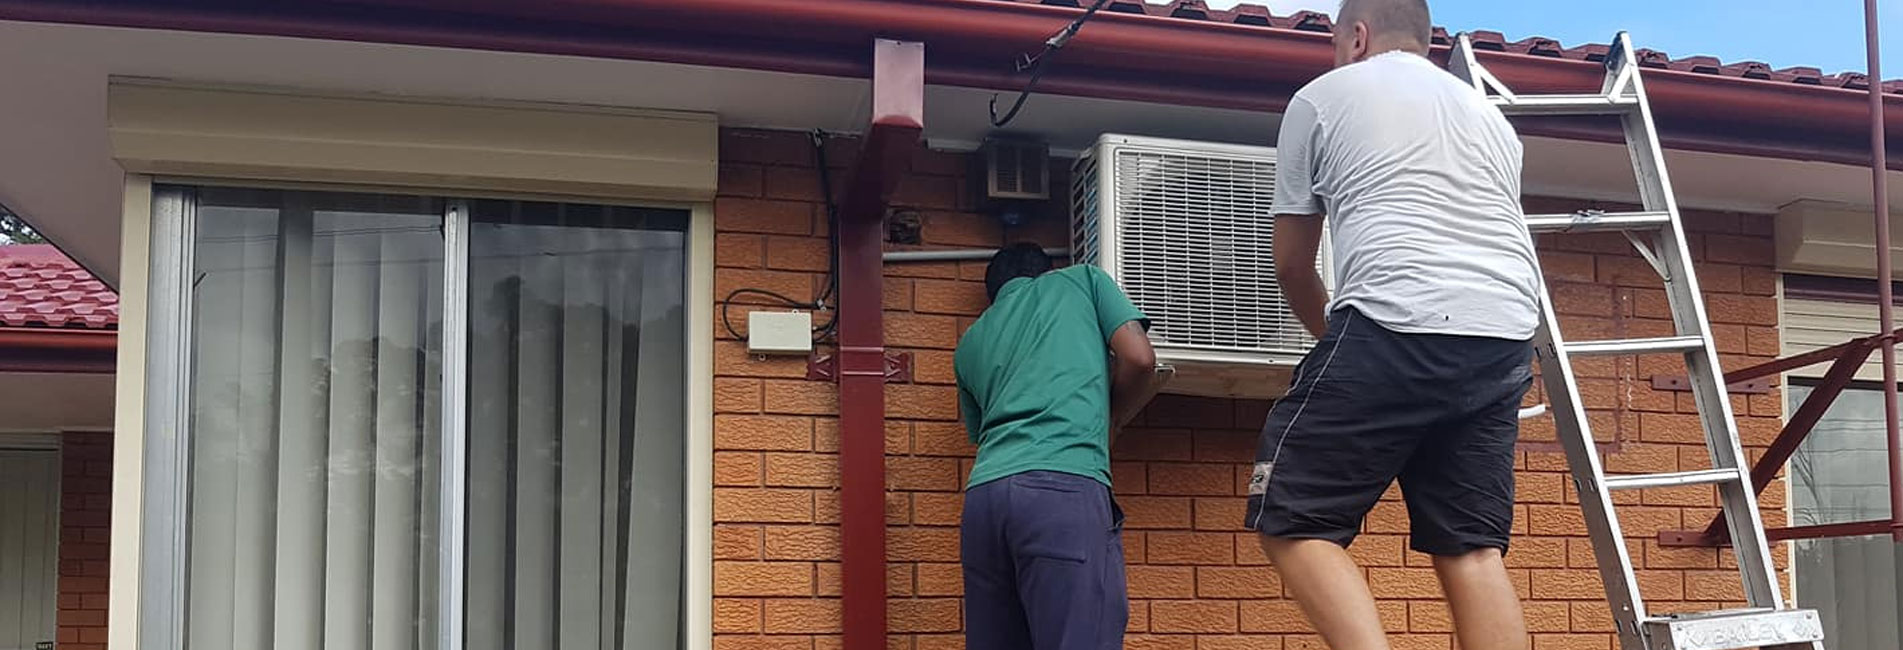 Ducted Air Conditioning Hoxton Park, Split System AC Glenfield, Airconditioning Repairs South West Sydney